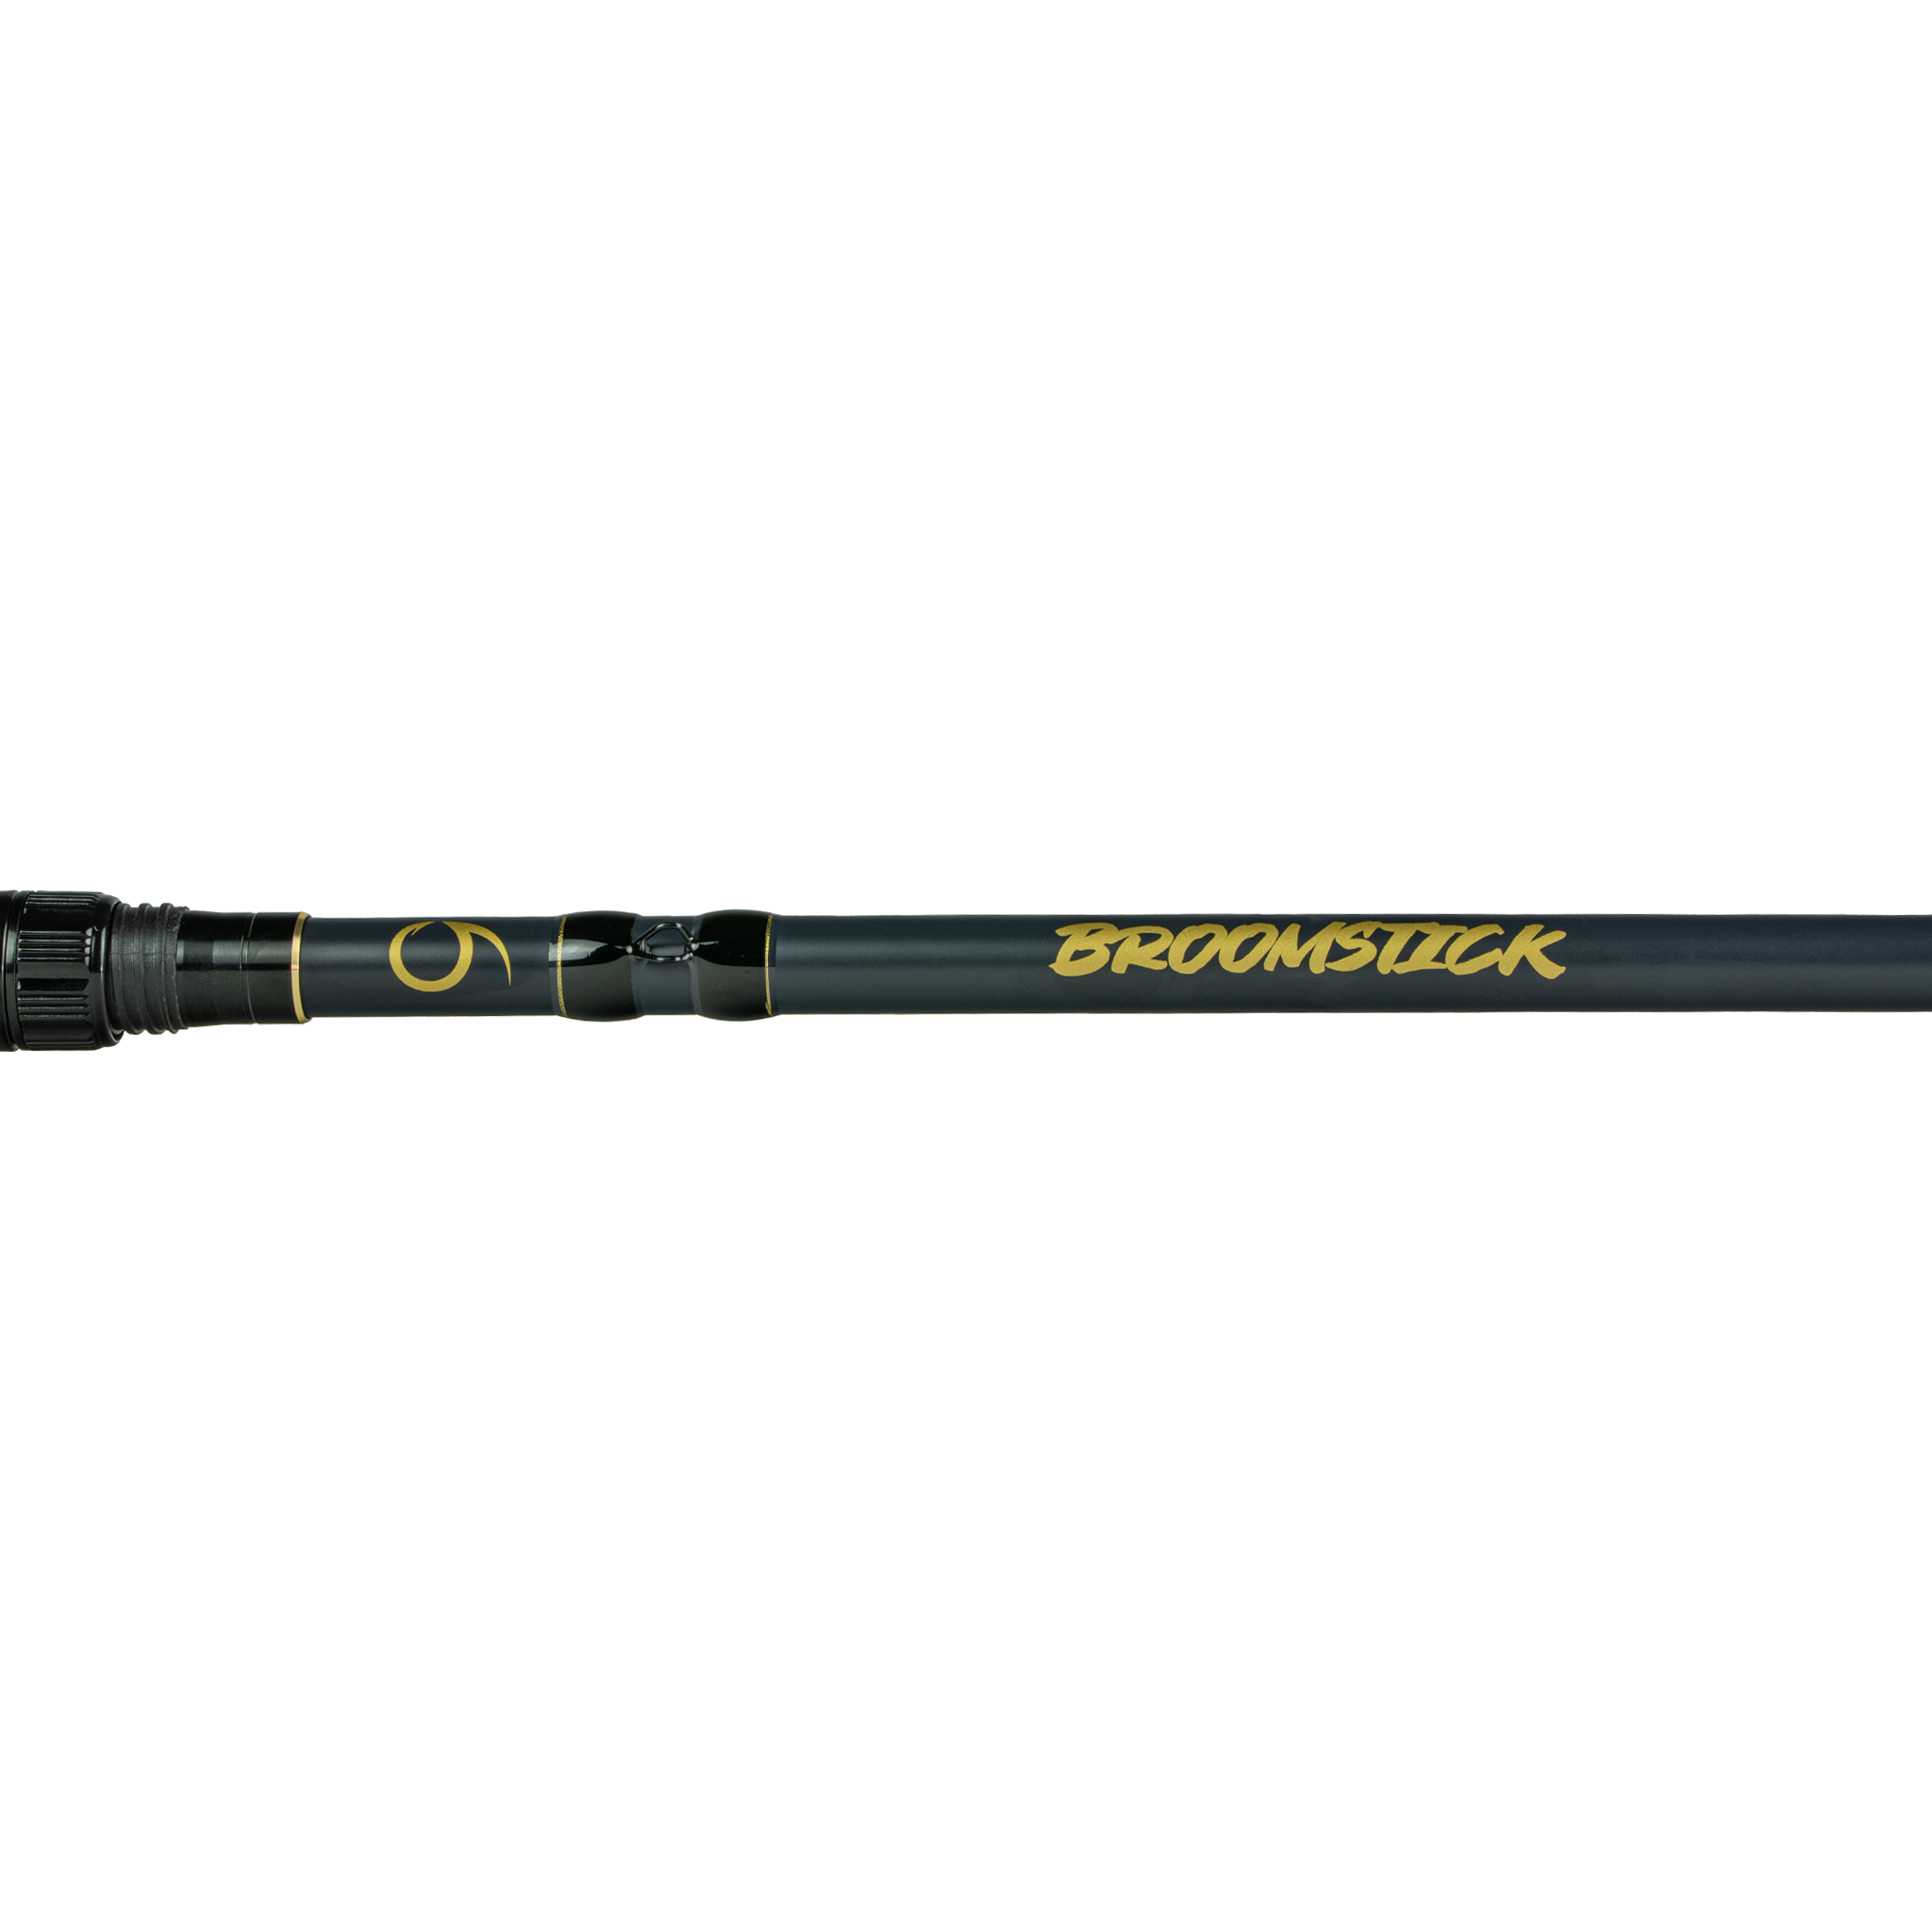 6th Sense Fishing - Rods - The Broomstick 7'10 Extra-Heavy, Mod-Fast